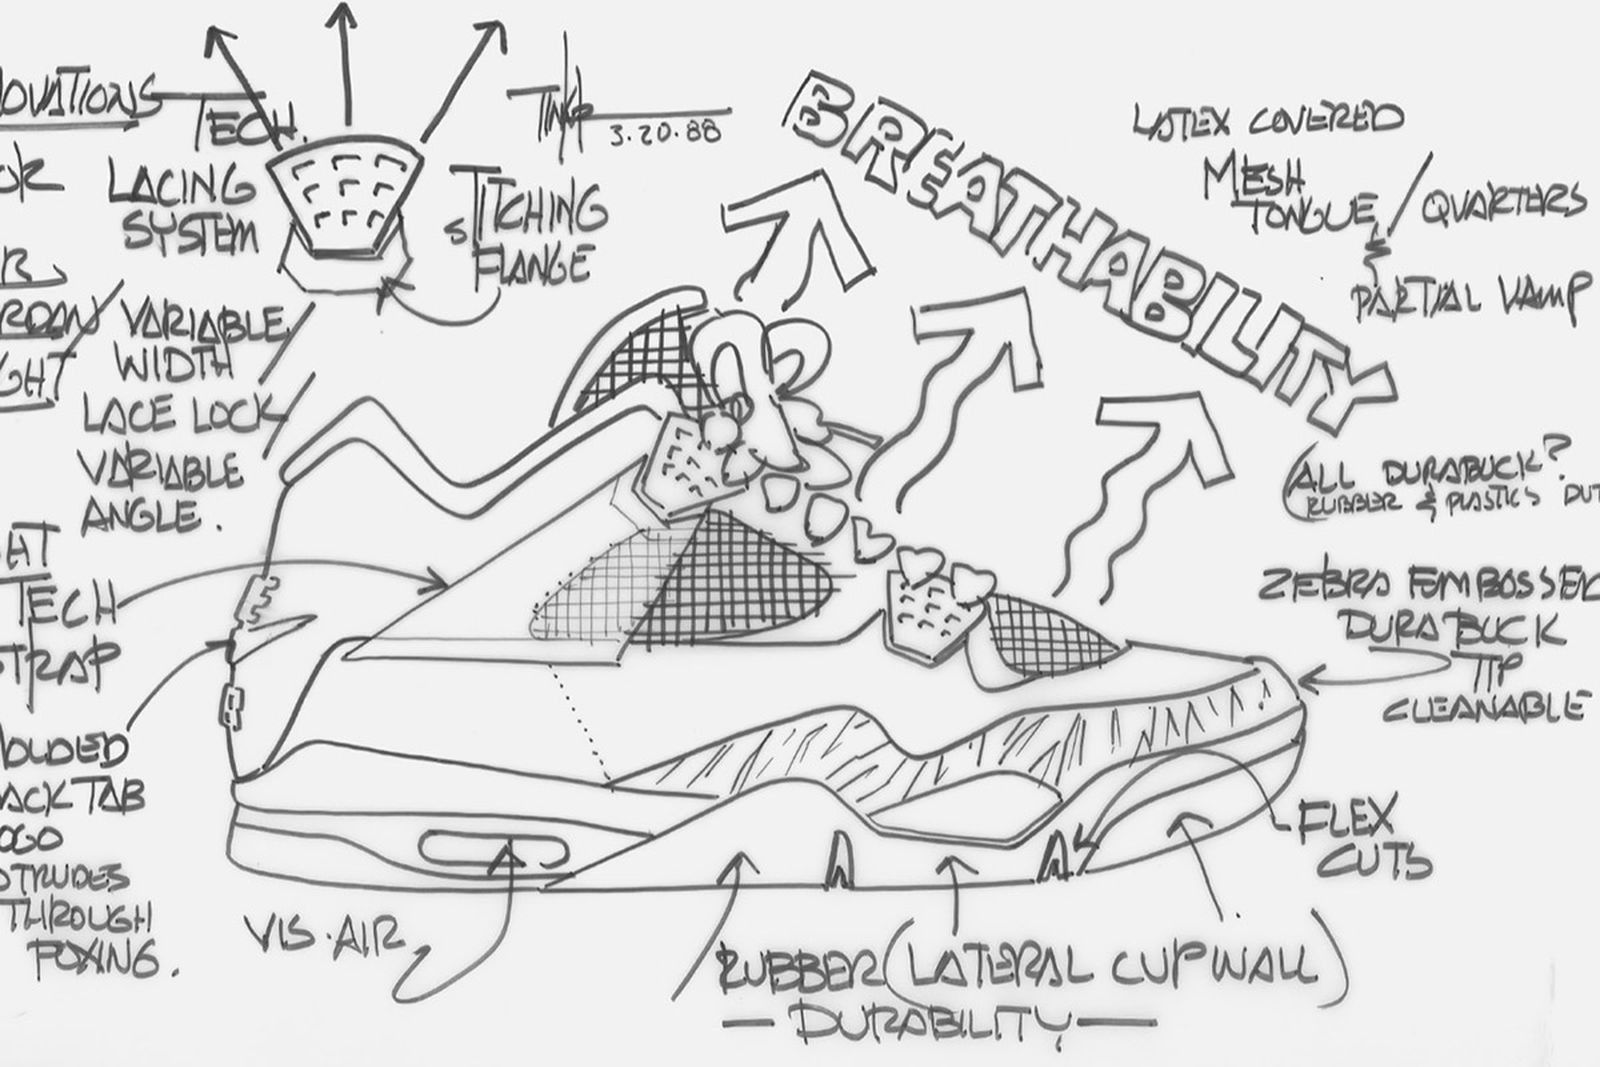 Take out insurance complexity aluminum A Brief History of the Air Jordan 4 - Sneaker Freaker